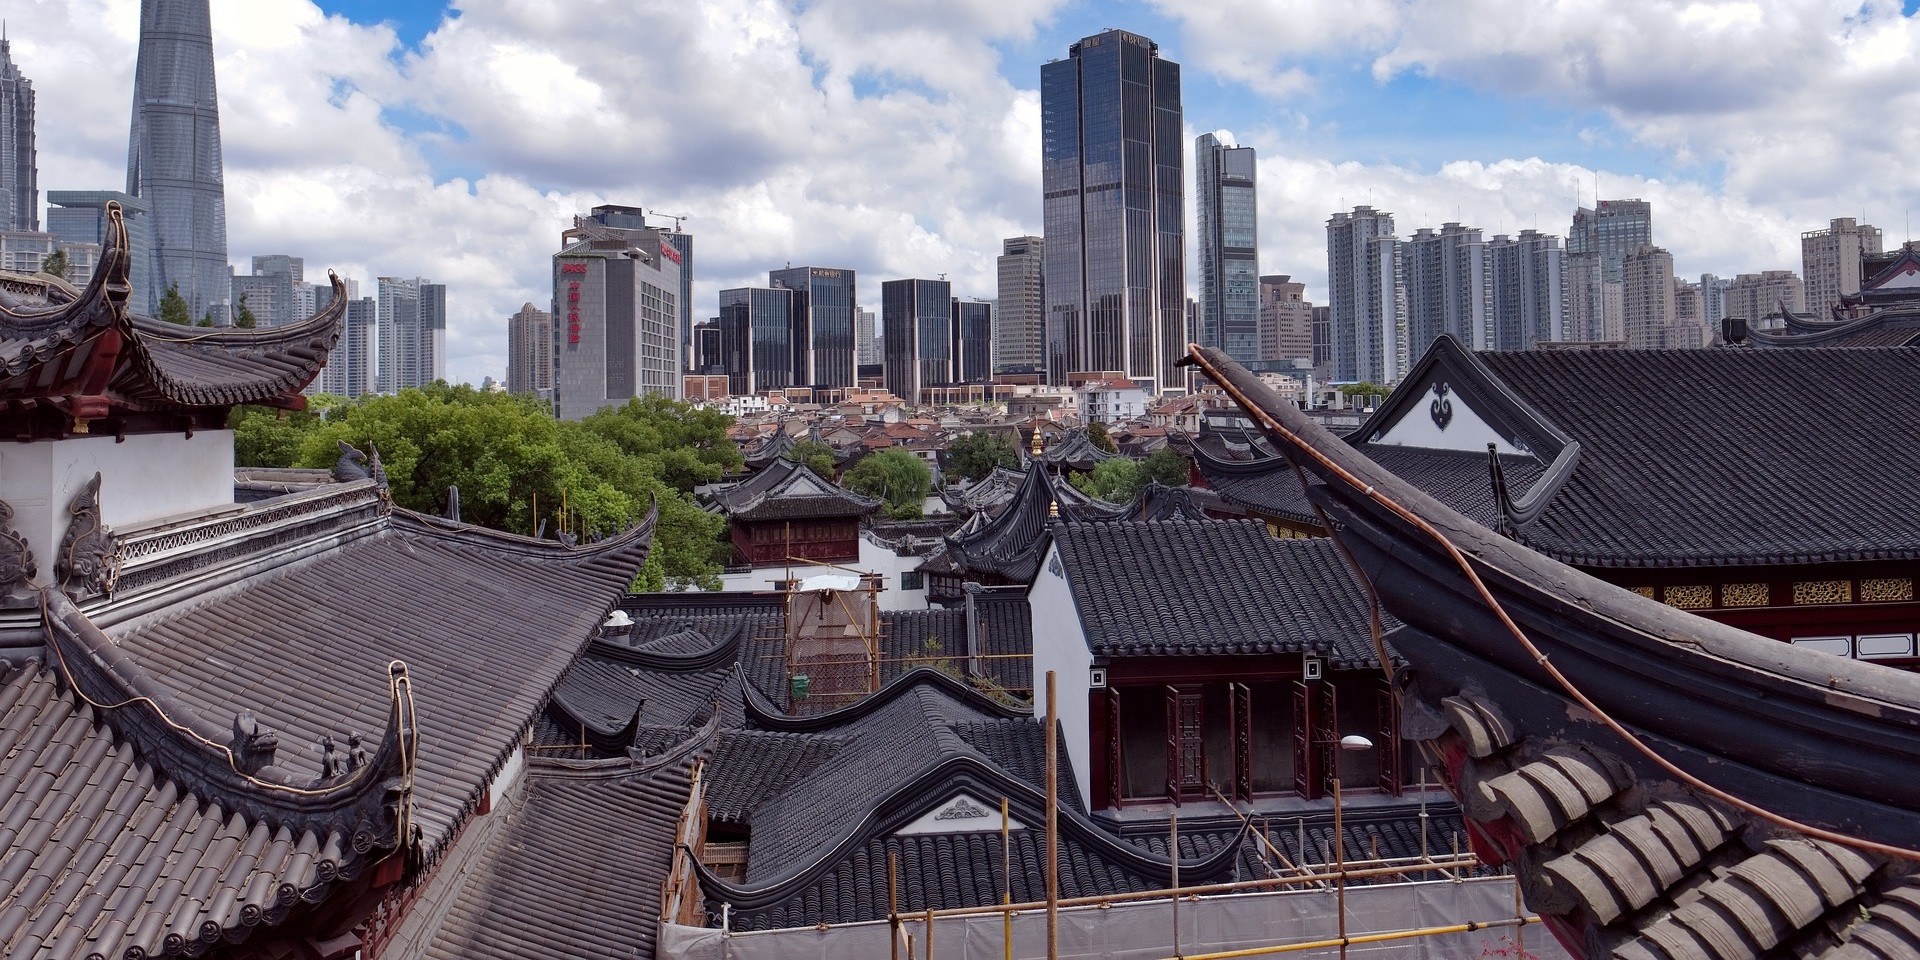 PLACES YOU MUST SEE WHILE YOU TEACH IN SHANGHAI